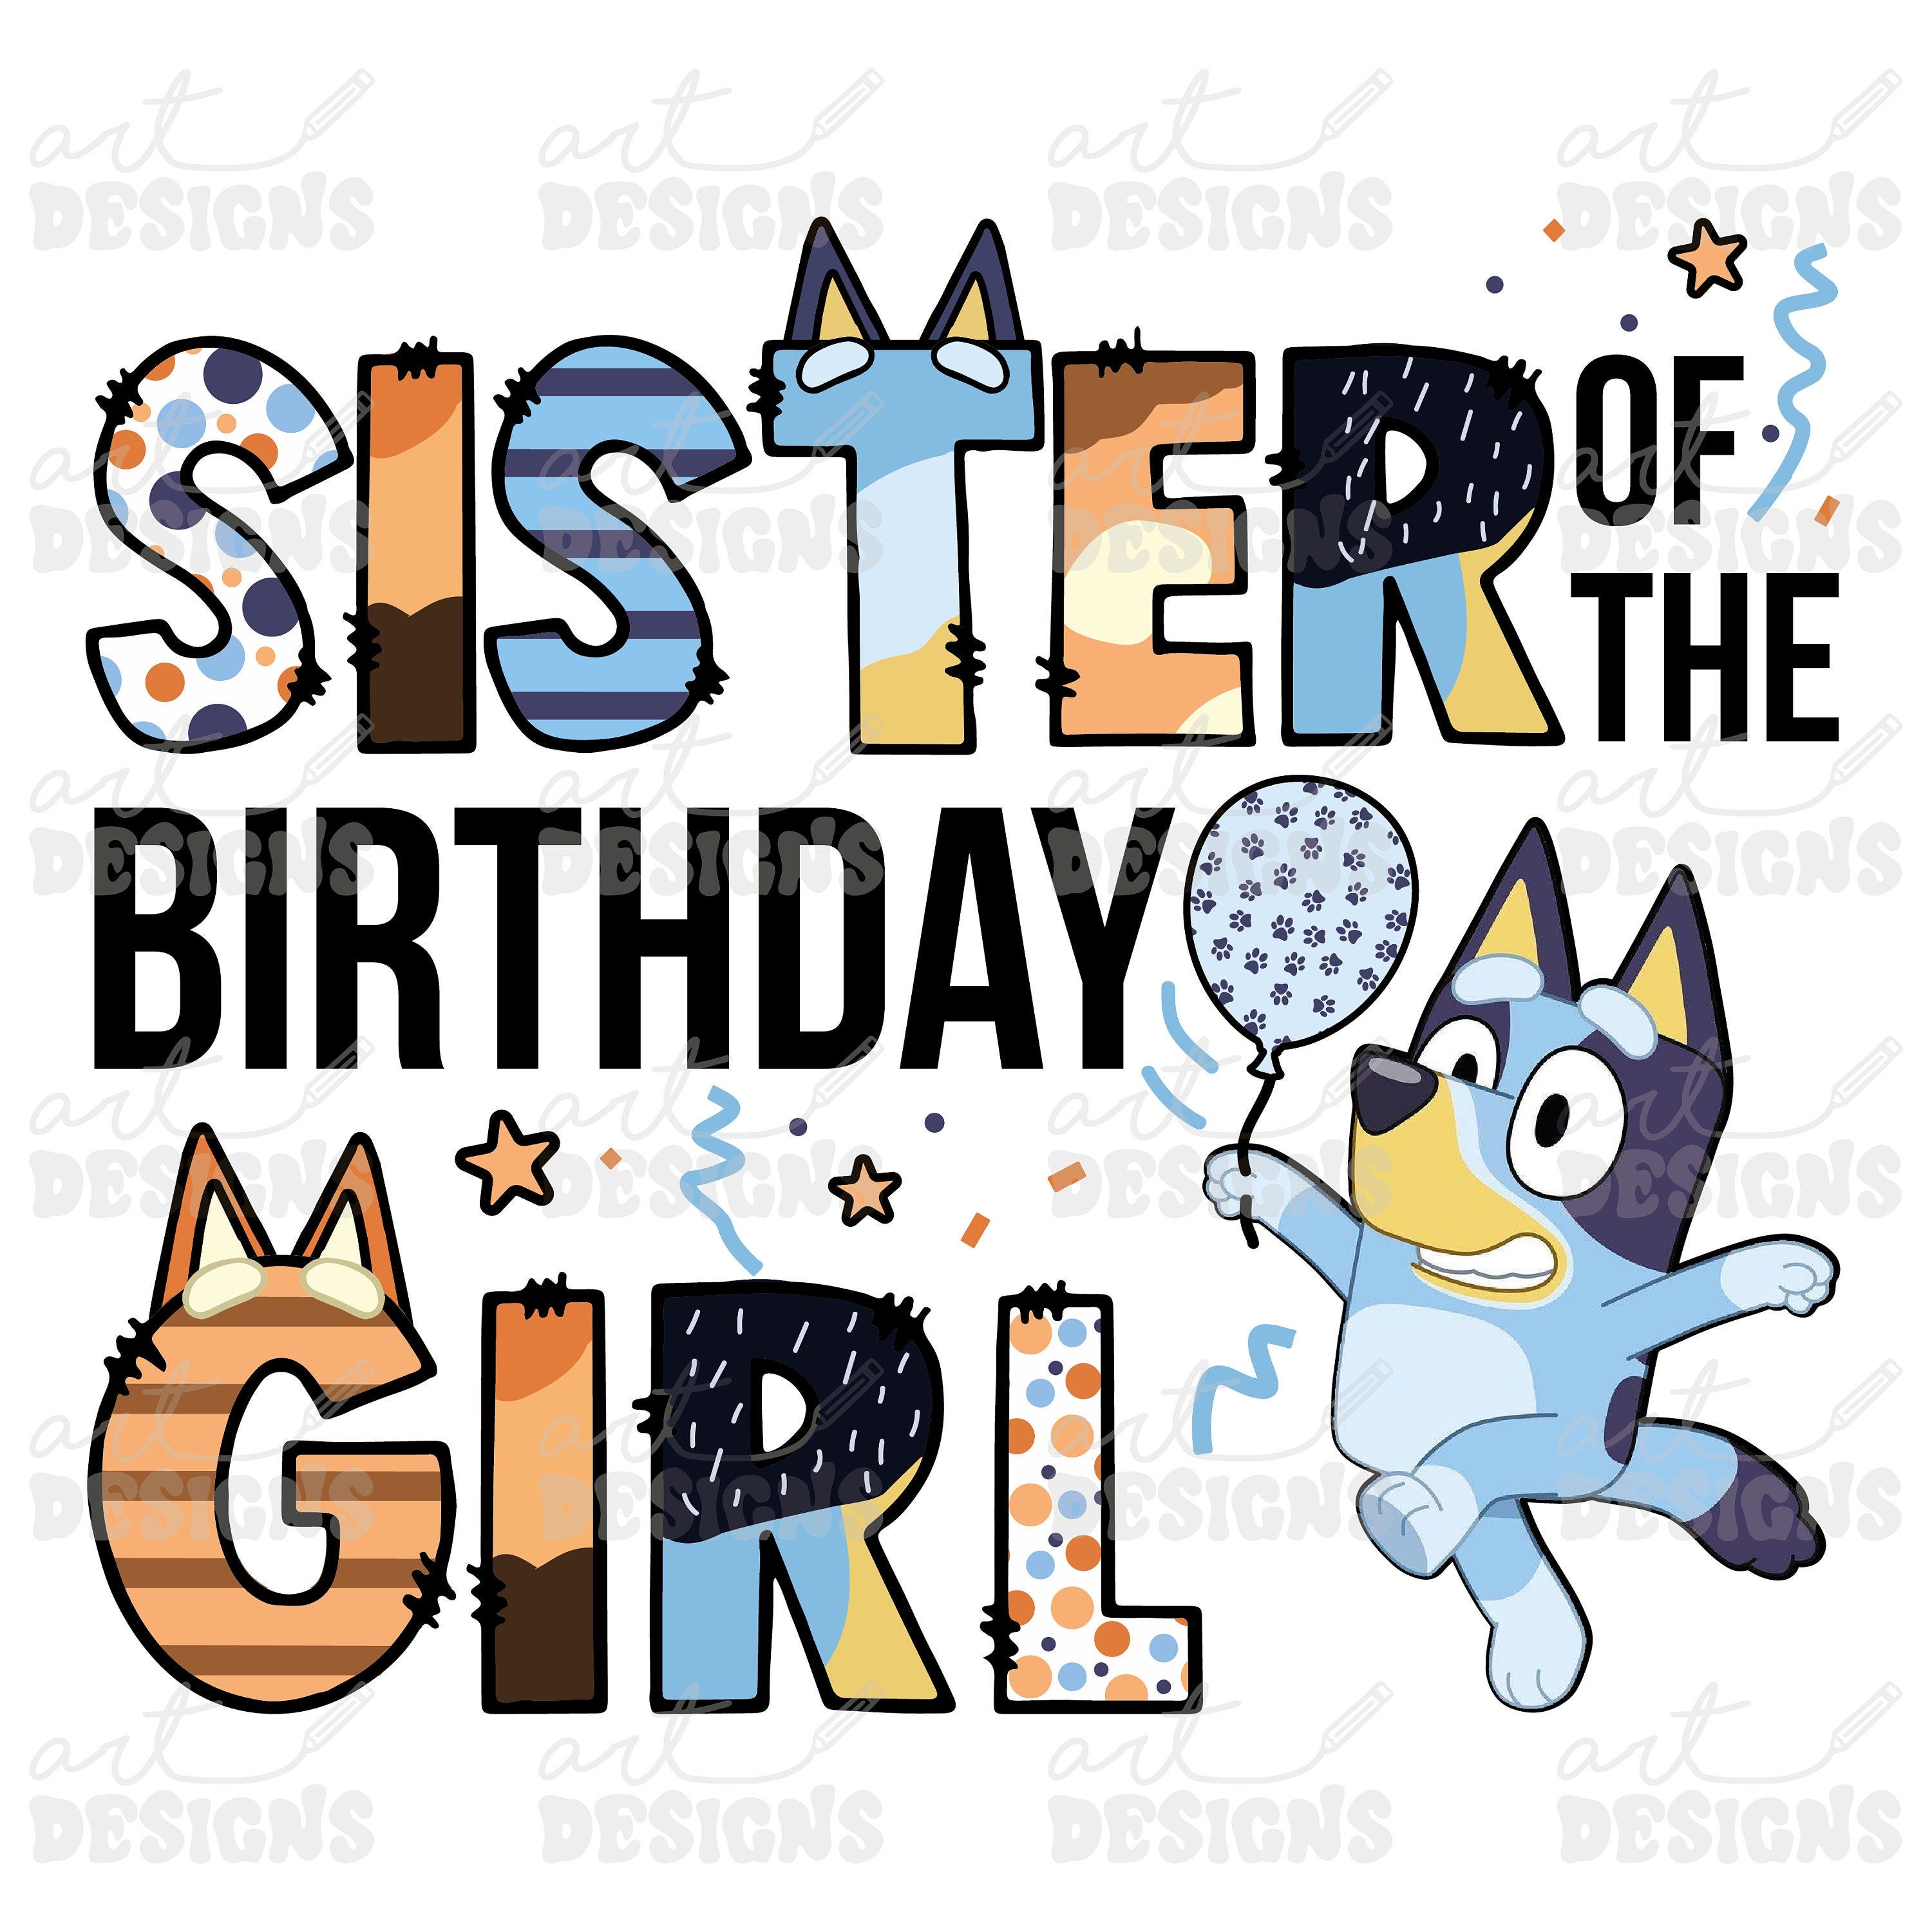 Bluey Sister of the Birthday Girl Clipart Elements, Letters Set, Blue Dog Sublimate Bday Party,  PNG, Family Matching Shirt